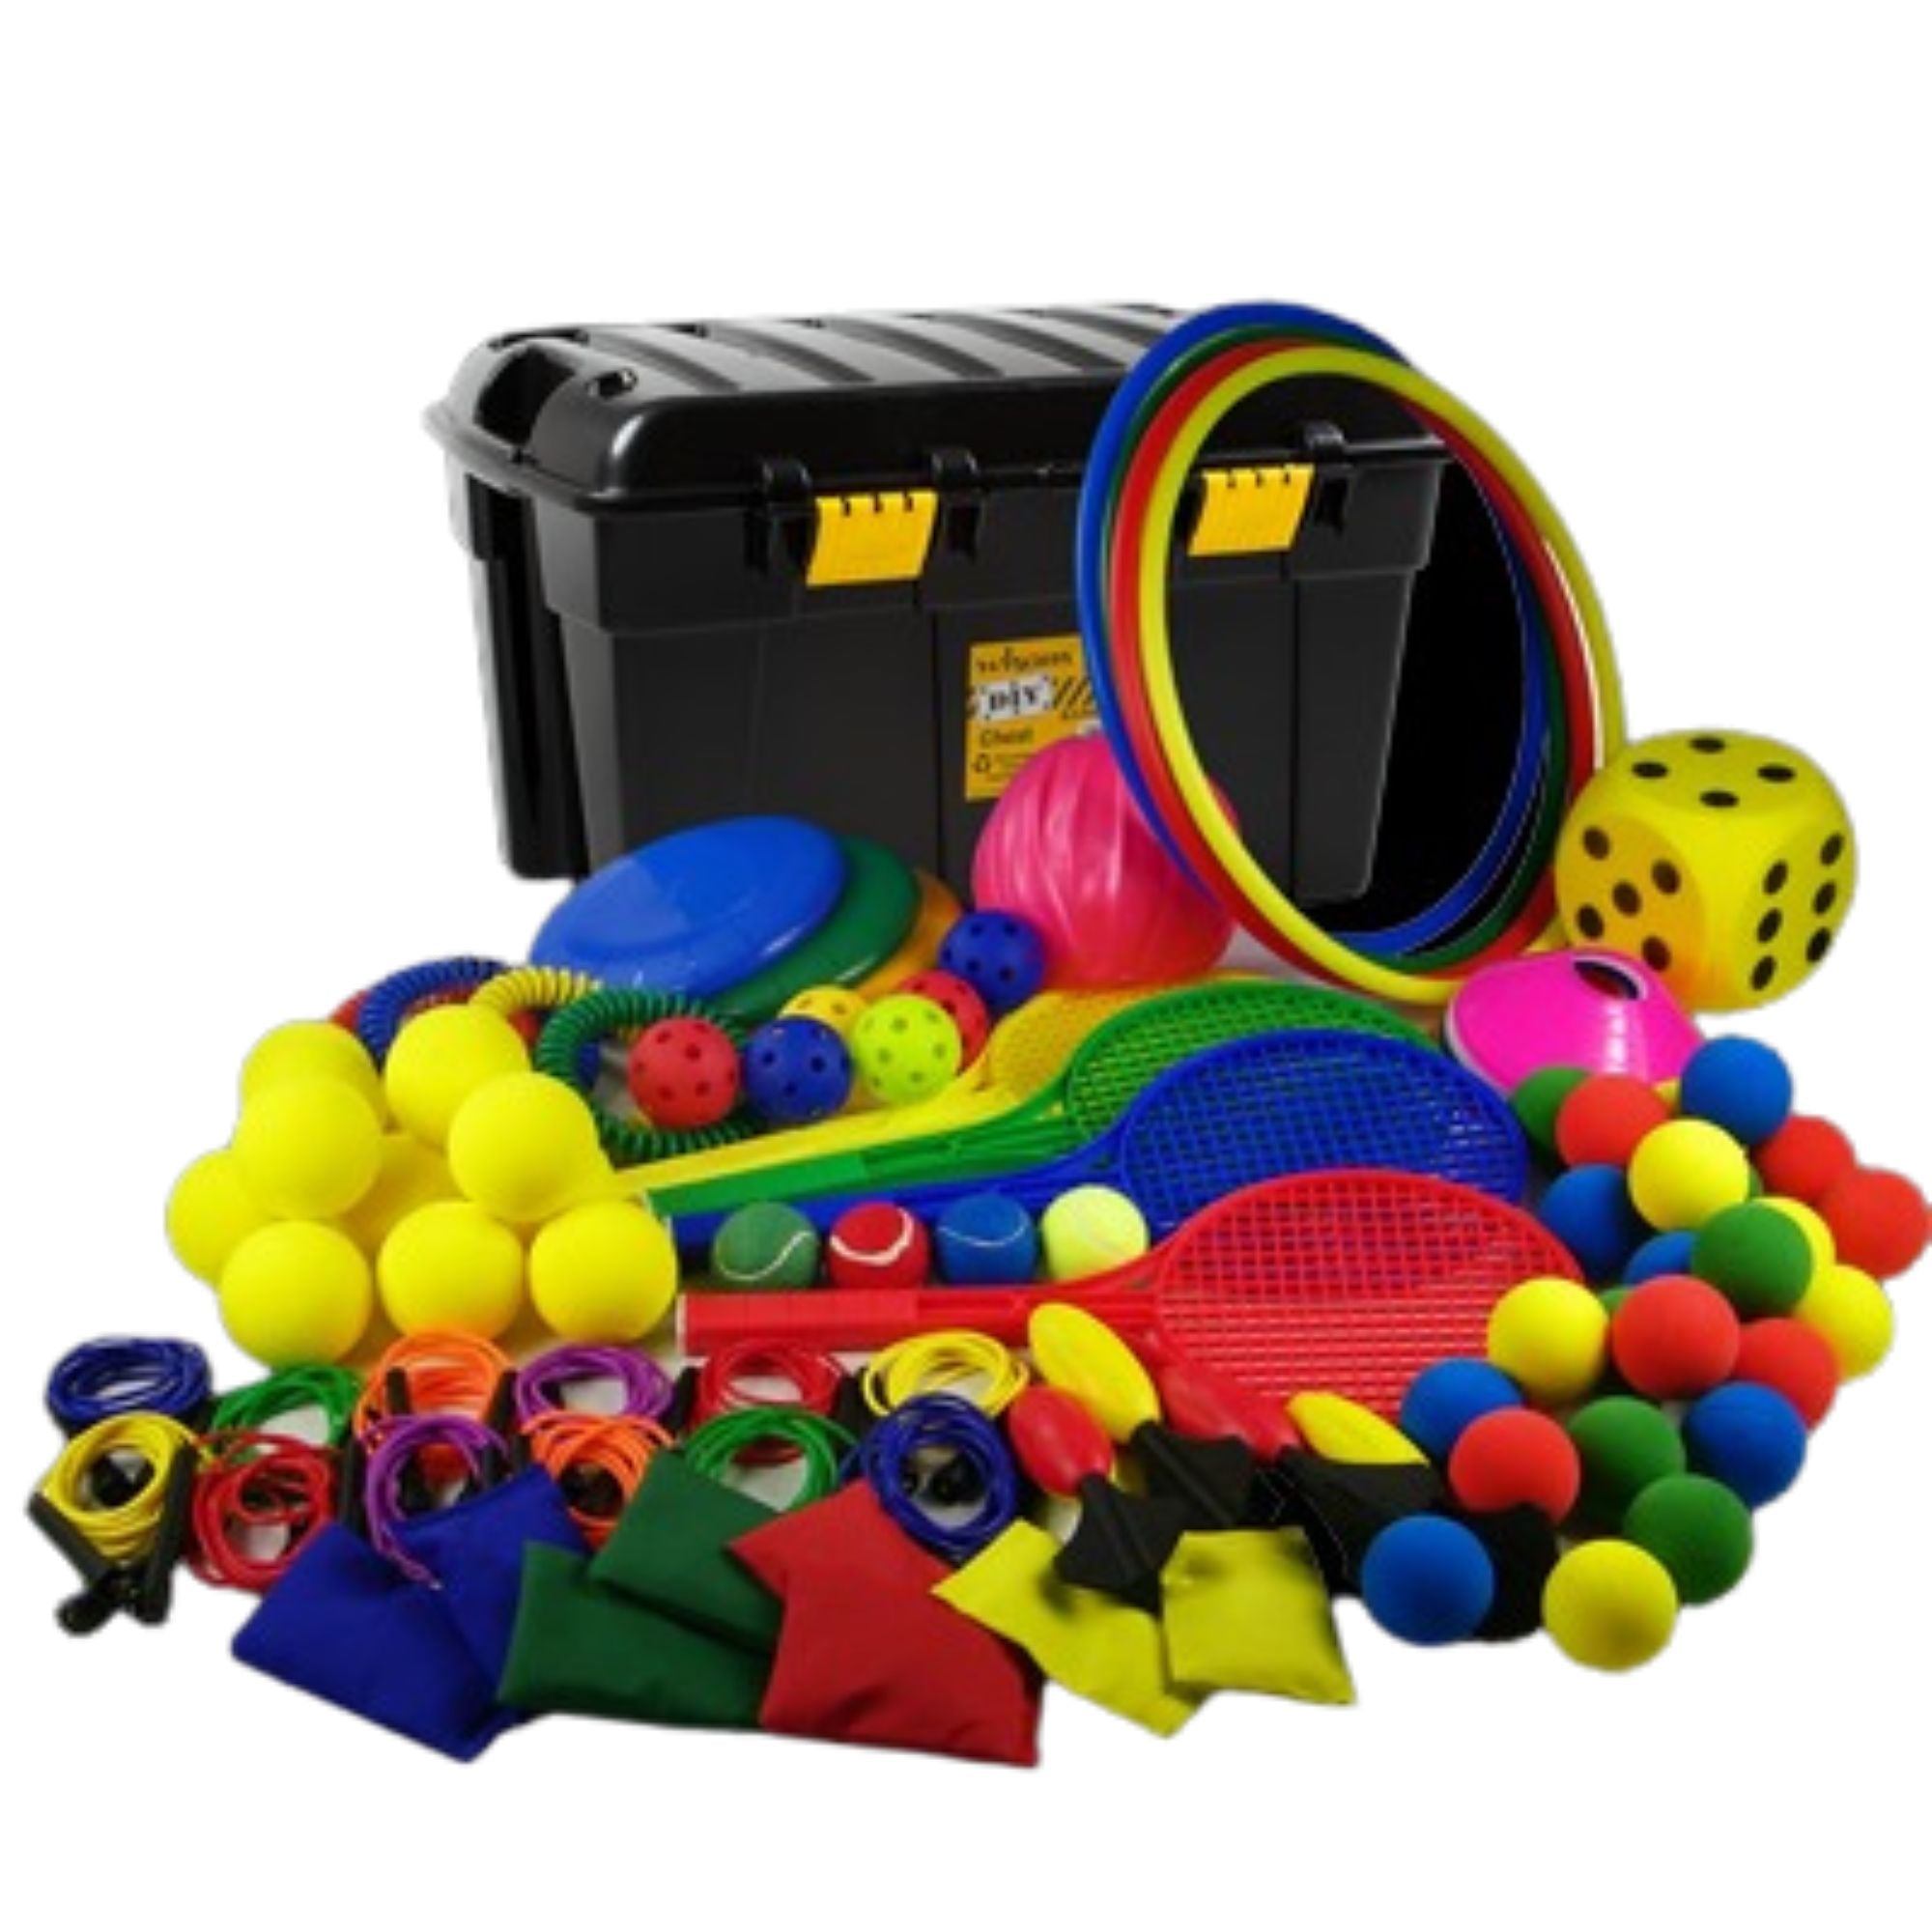 GetSetGo with Playtime Pack B, The GetSetGo Playtime Pack B offers a diverse range of play equipment, designed to engage children in various types of physical activities, making it an excellent choice for after-school programs or community events. The versatility of the equipment allows for a wide range of games and activities that can cater to different interests and skill levels. Here's a breakdown of the contents and their potential uses: GetSetGo with Playtime Pack B Items Throwing and Catching: 8 Bean 